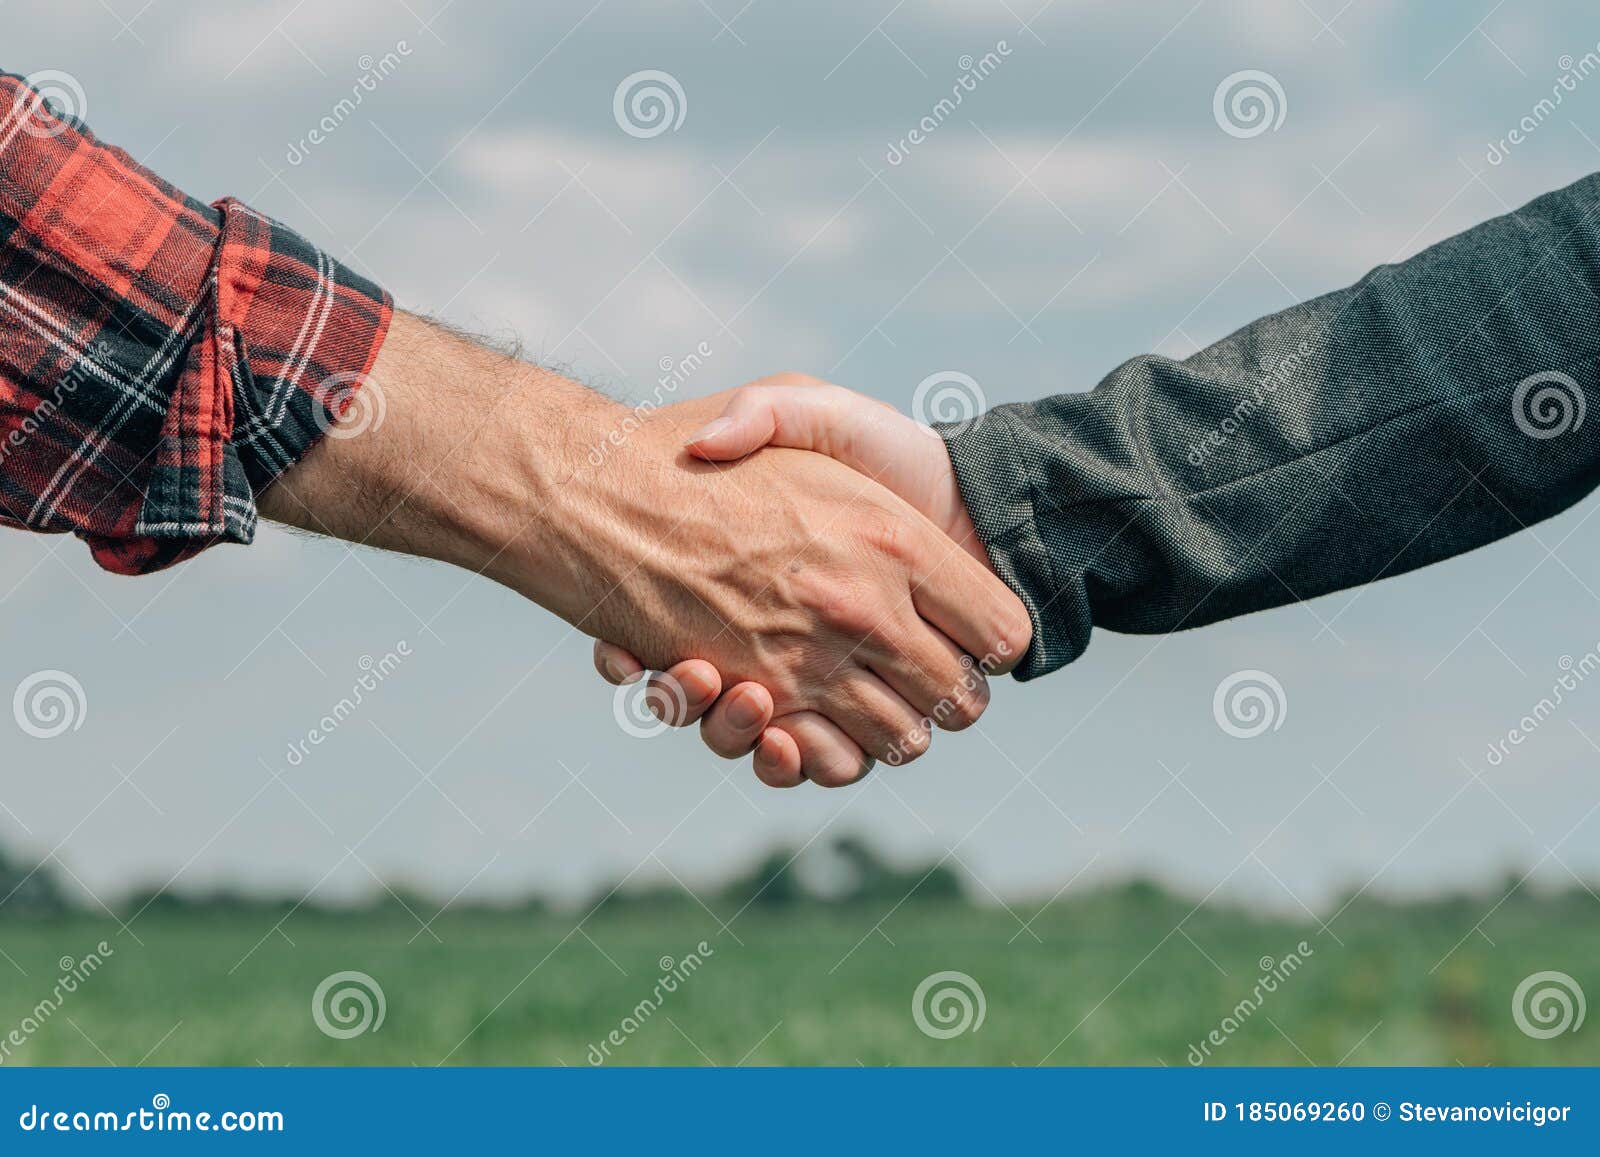 mortgage loan officer and farmer shaking hands upon reaching an agreement